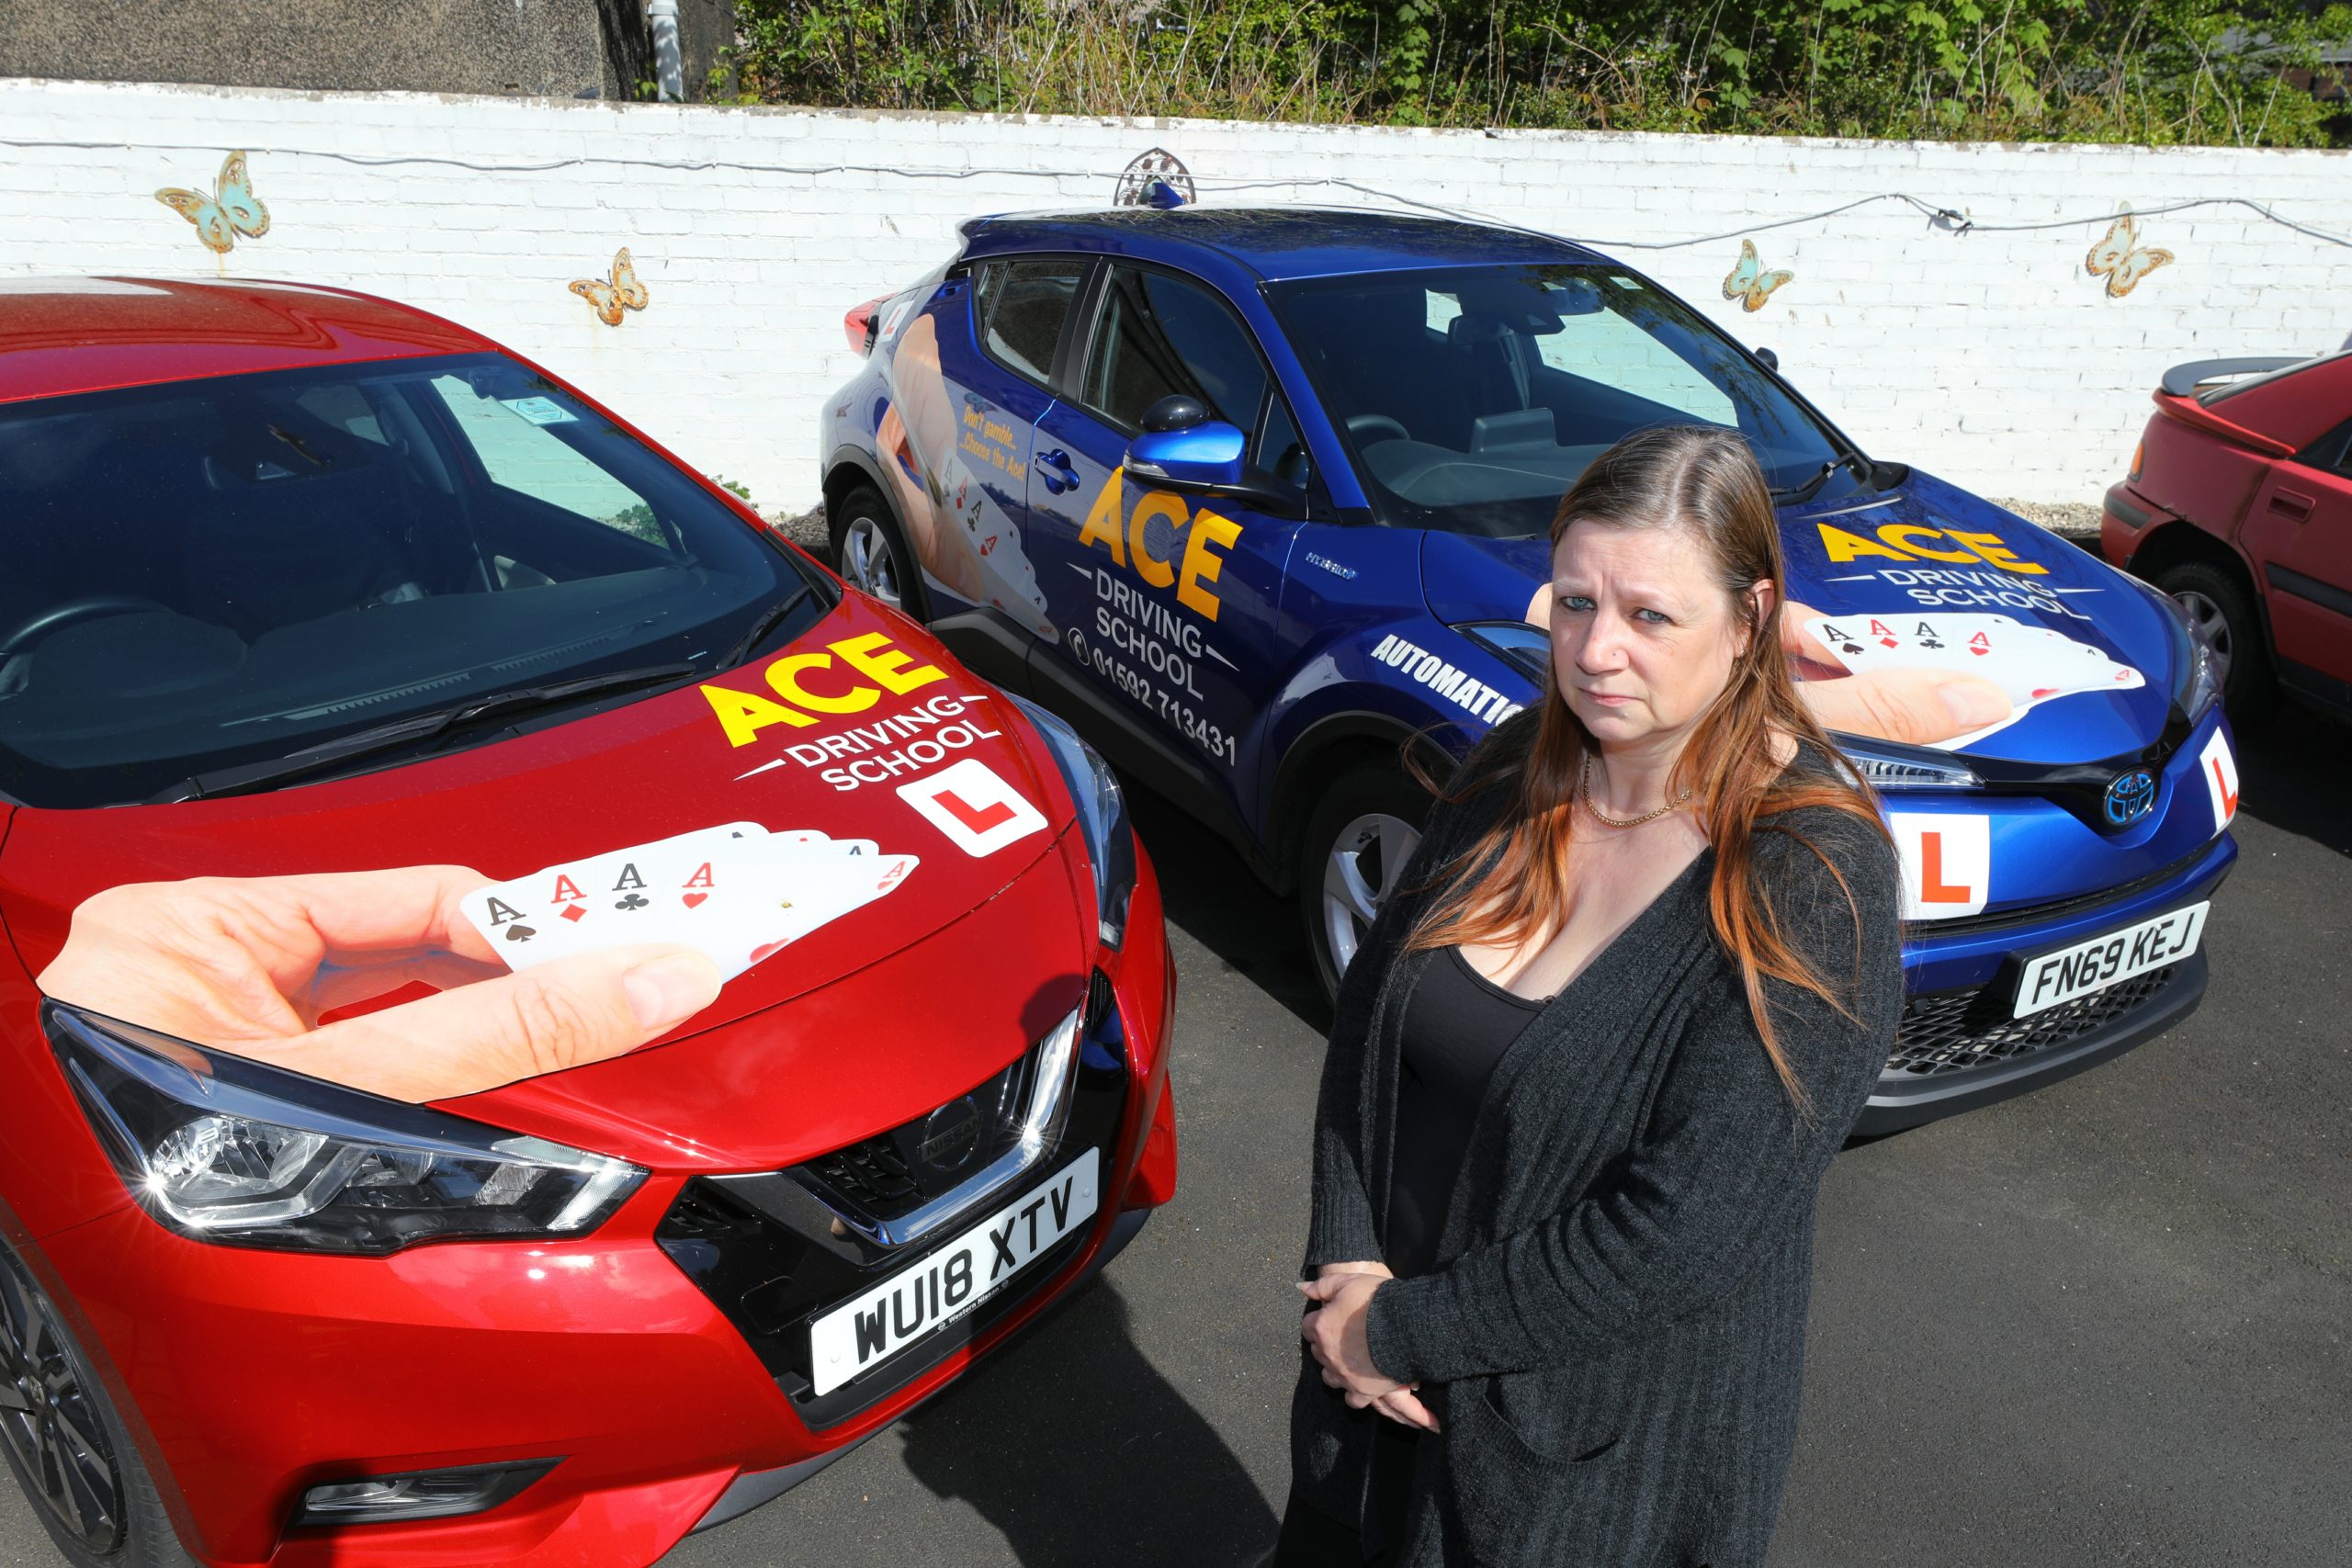 Driving instructor Dawn King, of Ace Driving School has been hit hard financially, due to the coronavirus crisis